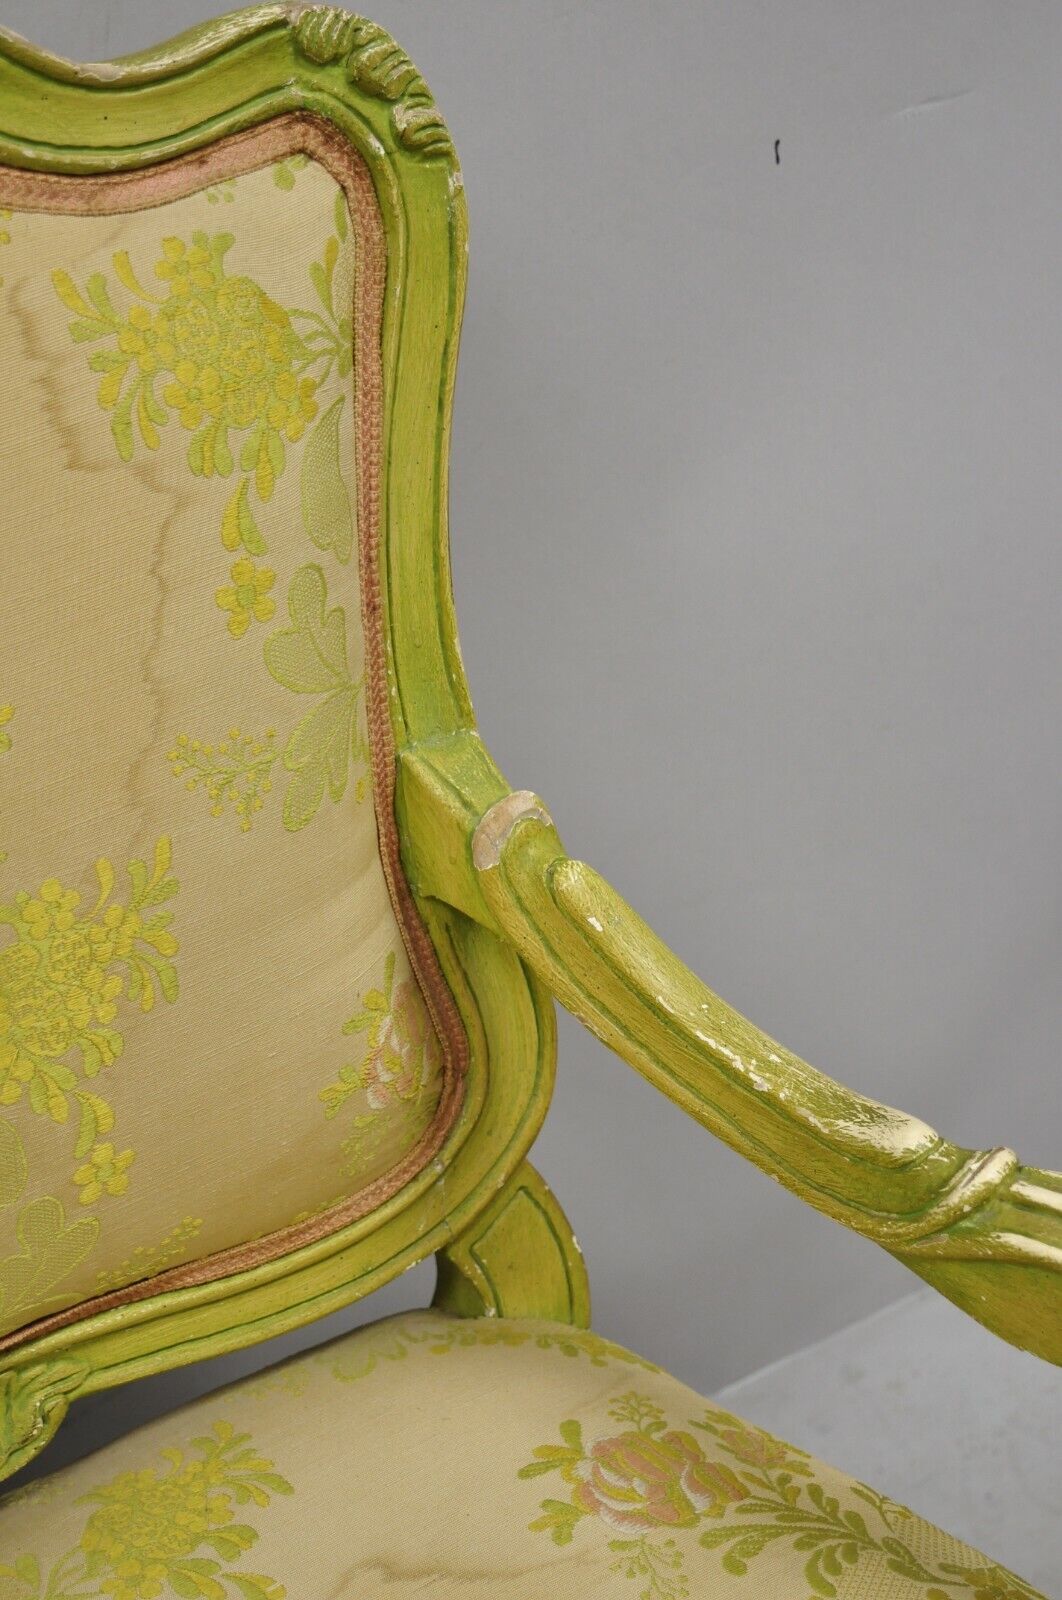 Italian Rococo Hollywood Regency Green Painted Fireside Lounge Arm Chairs - Pair